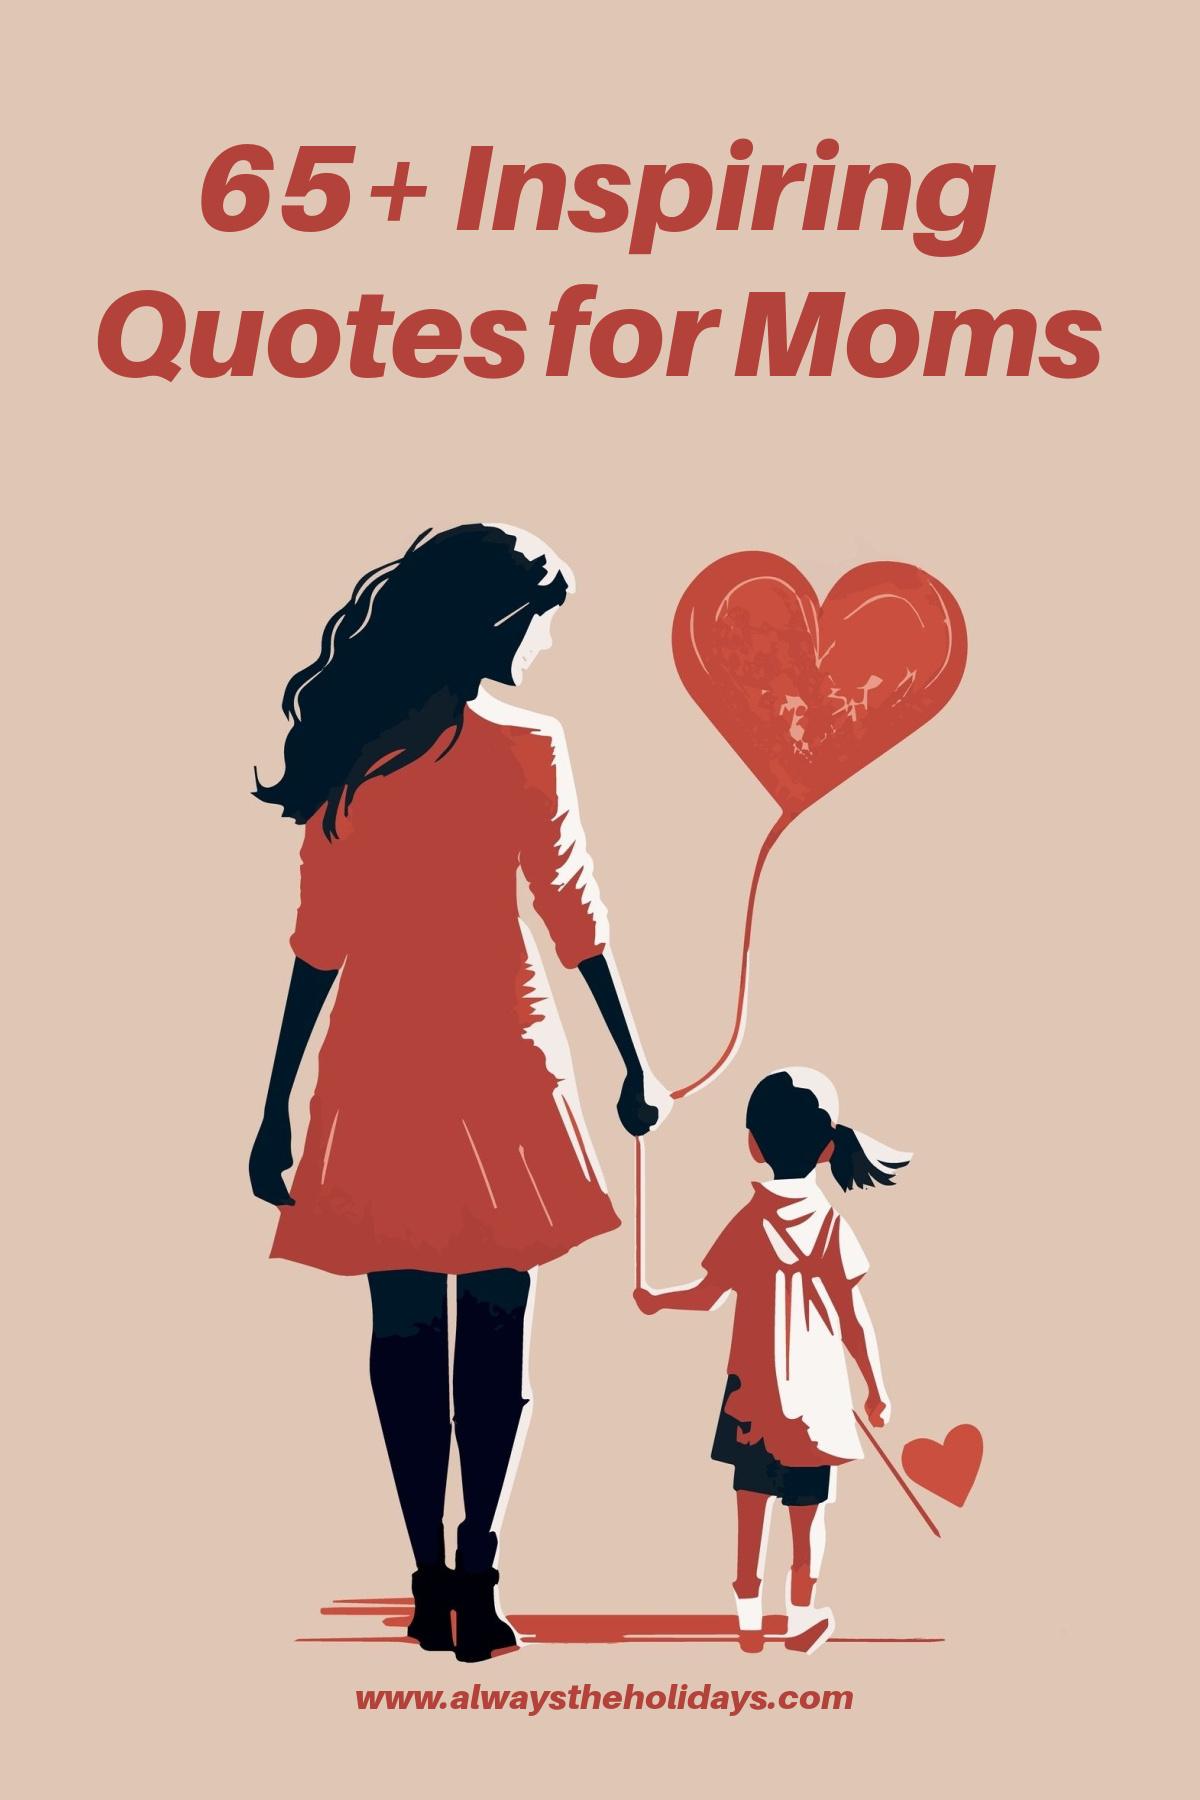 A peach background with a text overlay that reads "65+ inspiring quotes for moms" above an illustration of a mother holding a heart balloon walking next to her daughter who is also holding a heart balloon.